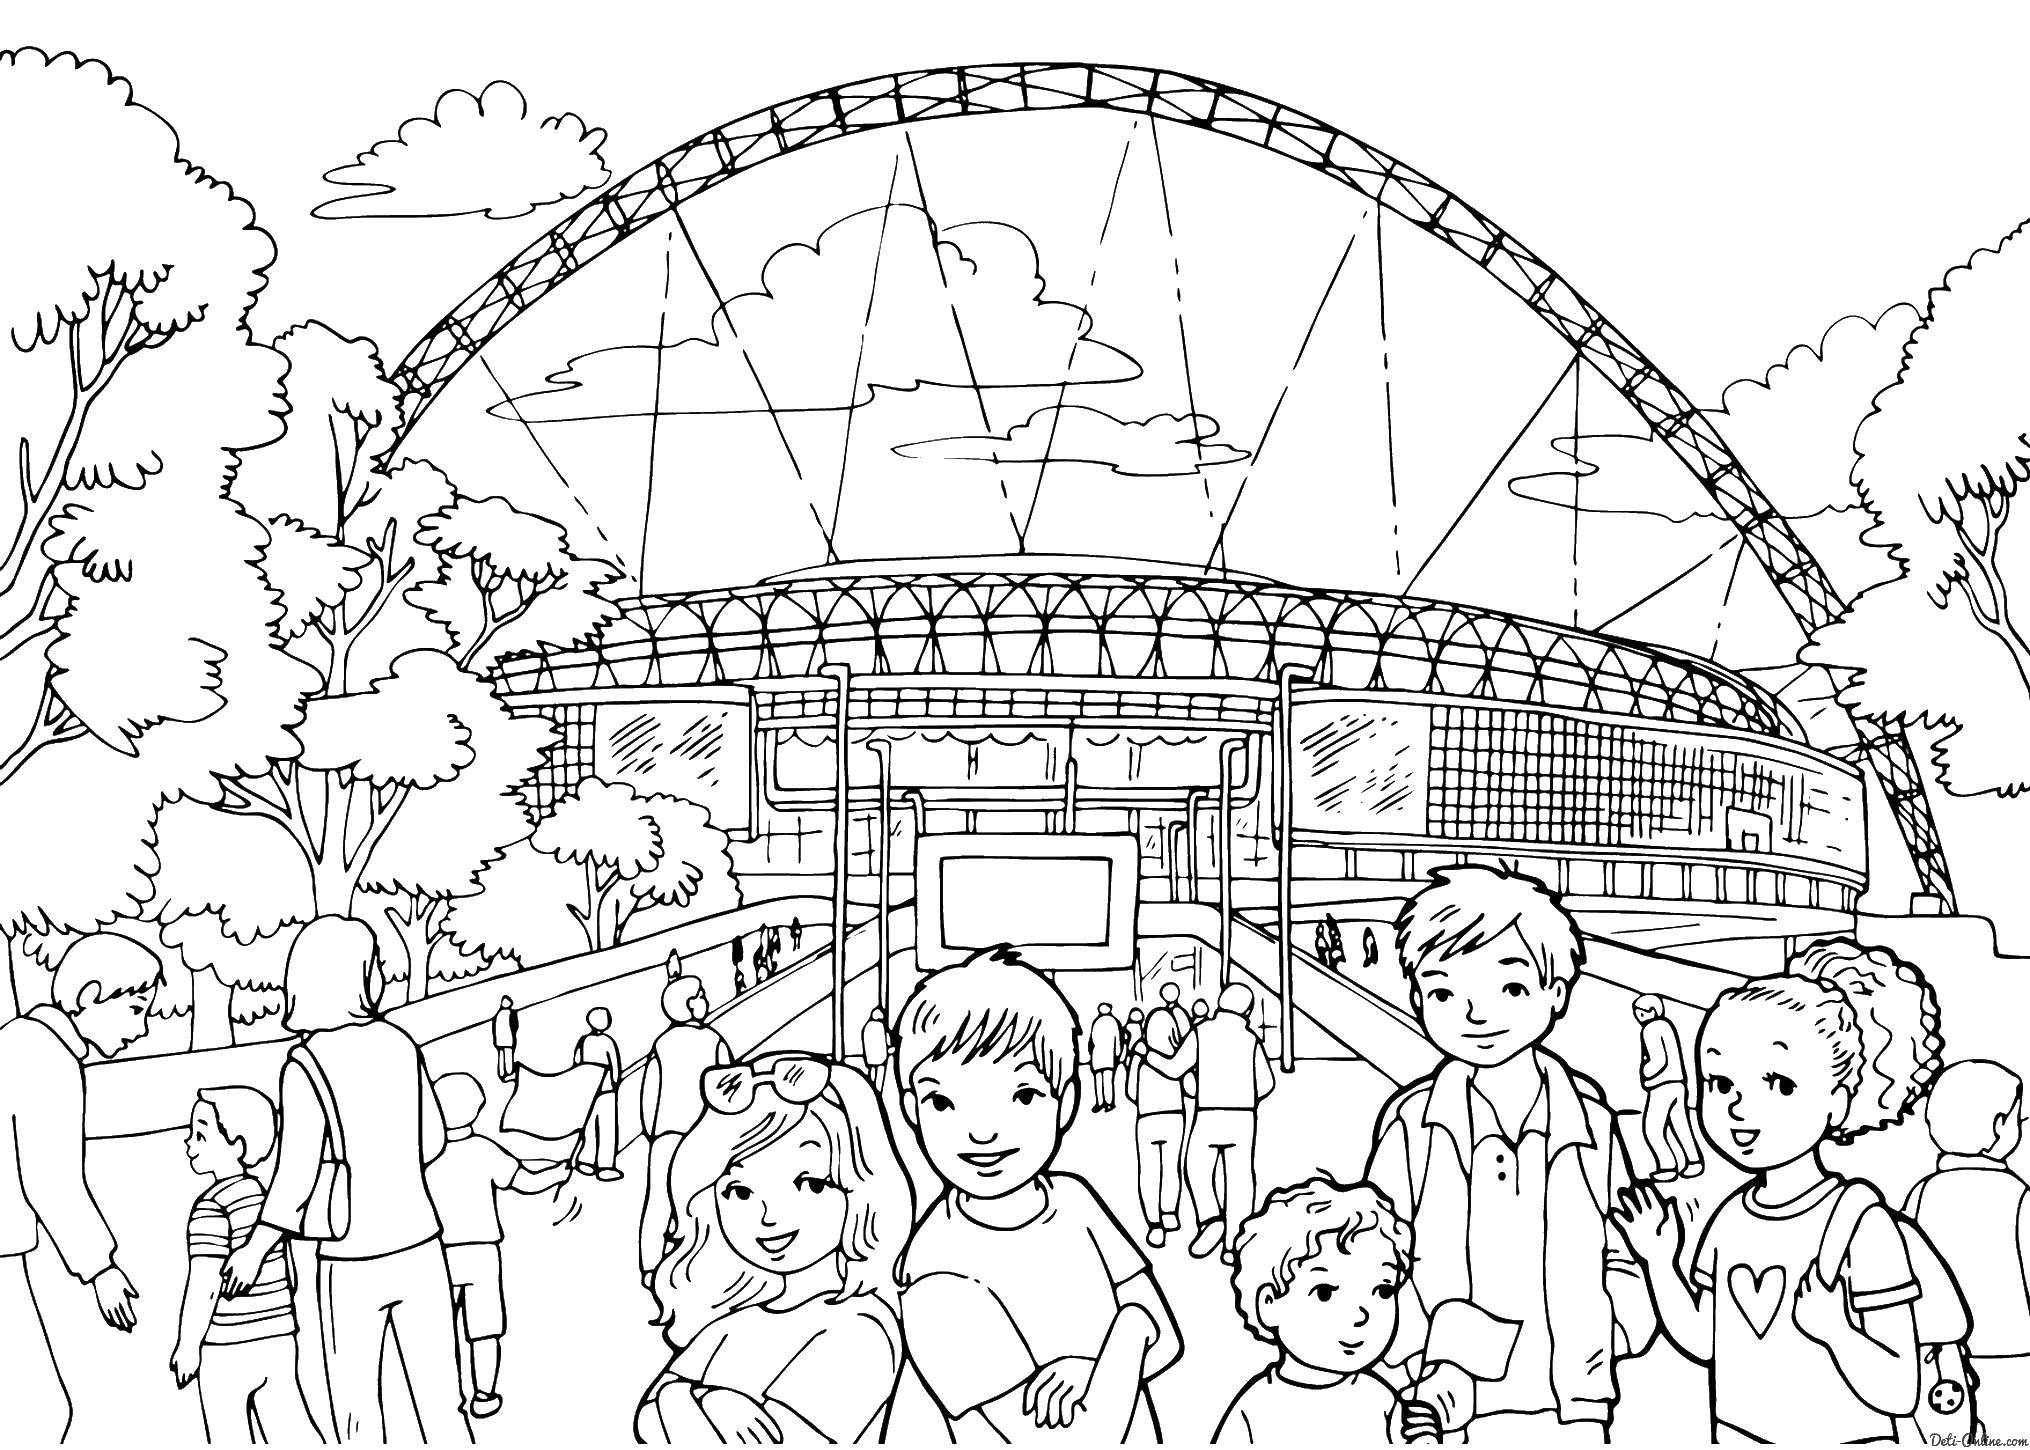 Coloring People at a sports stadium. Category sports. Tags:  Sports, stadium.